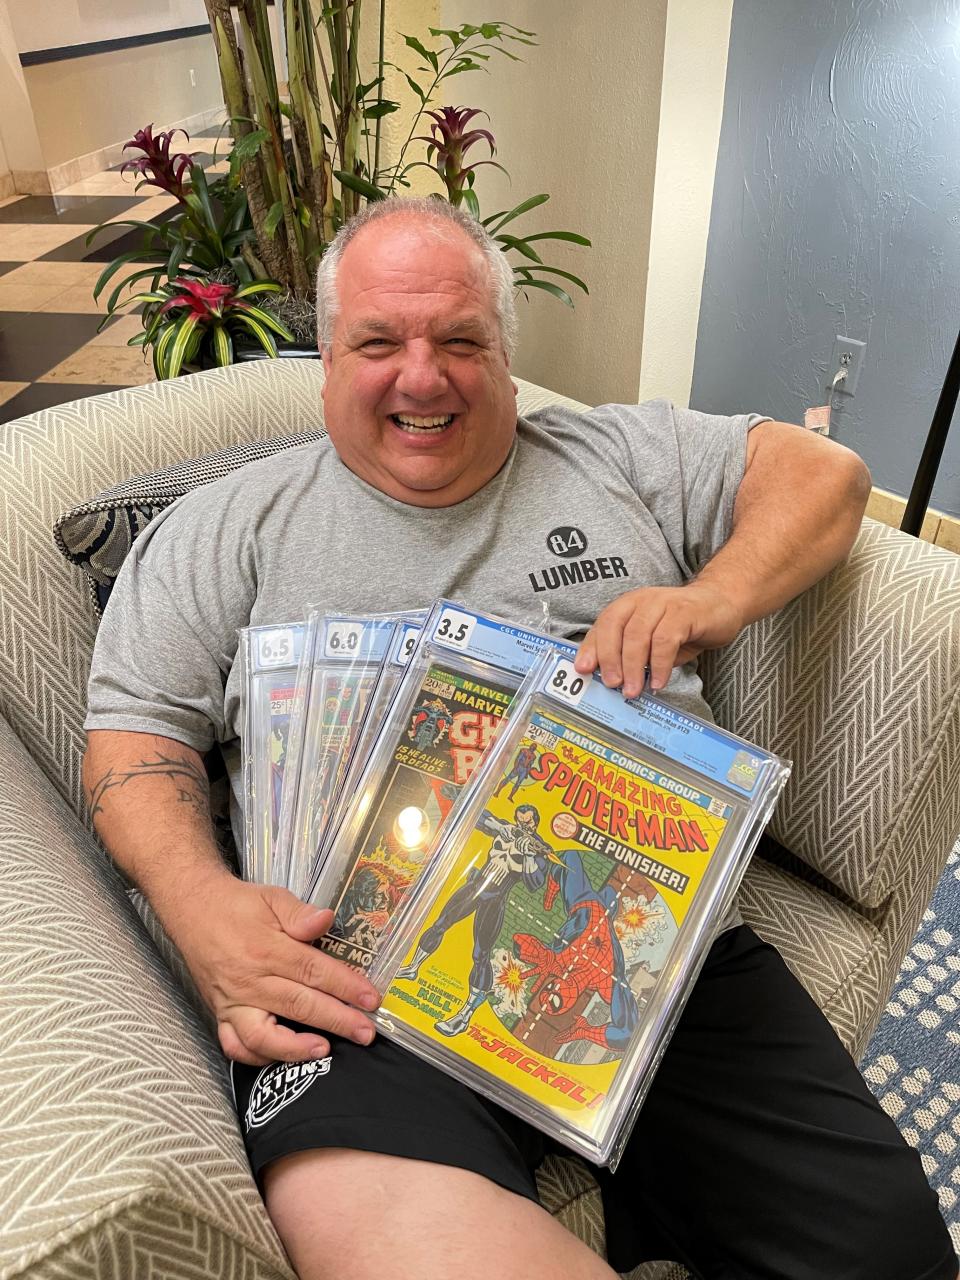 SW-Florida ComicCon co-organizer David Hess poses with comics he bought at the August event.